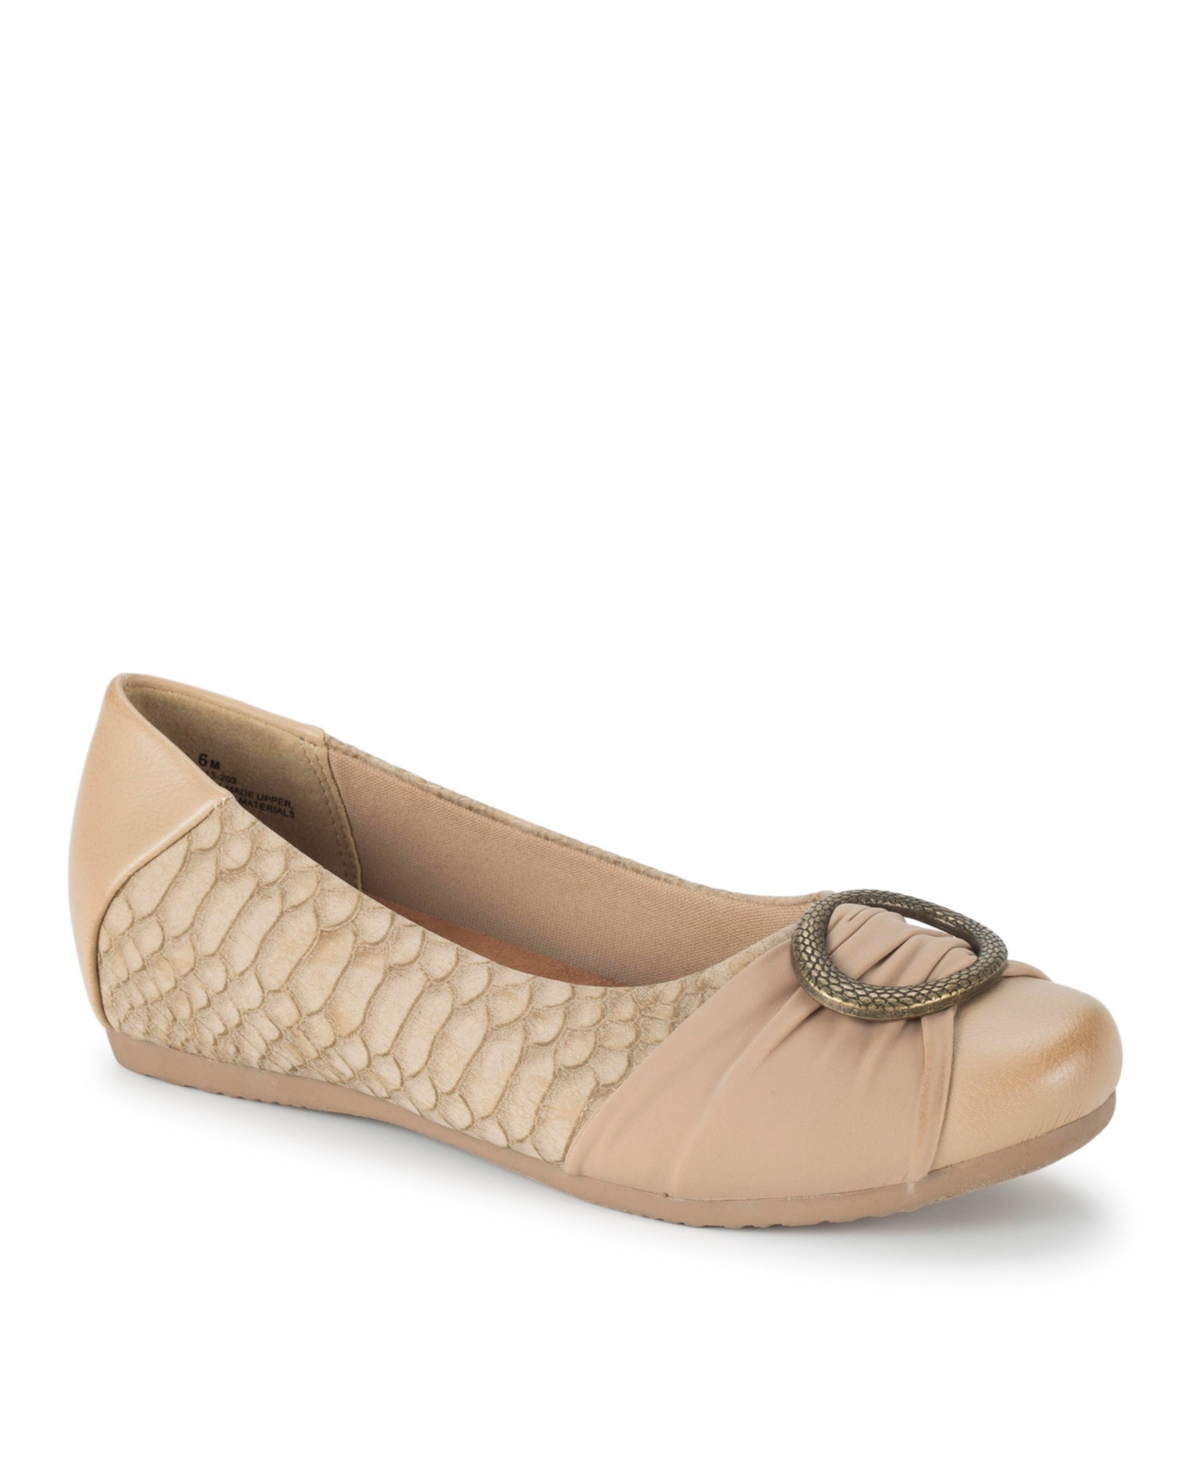 Baretraps Women's Mabely Flats In Camel